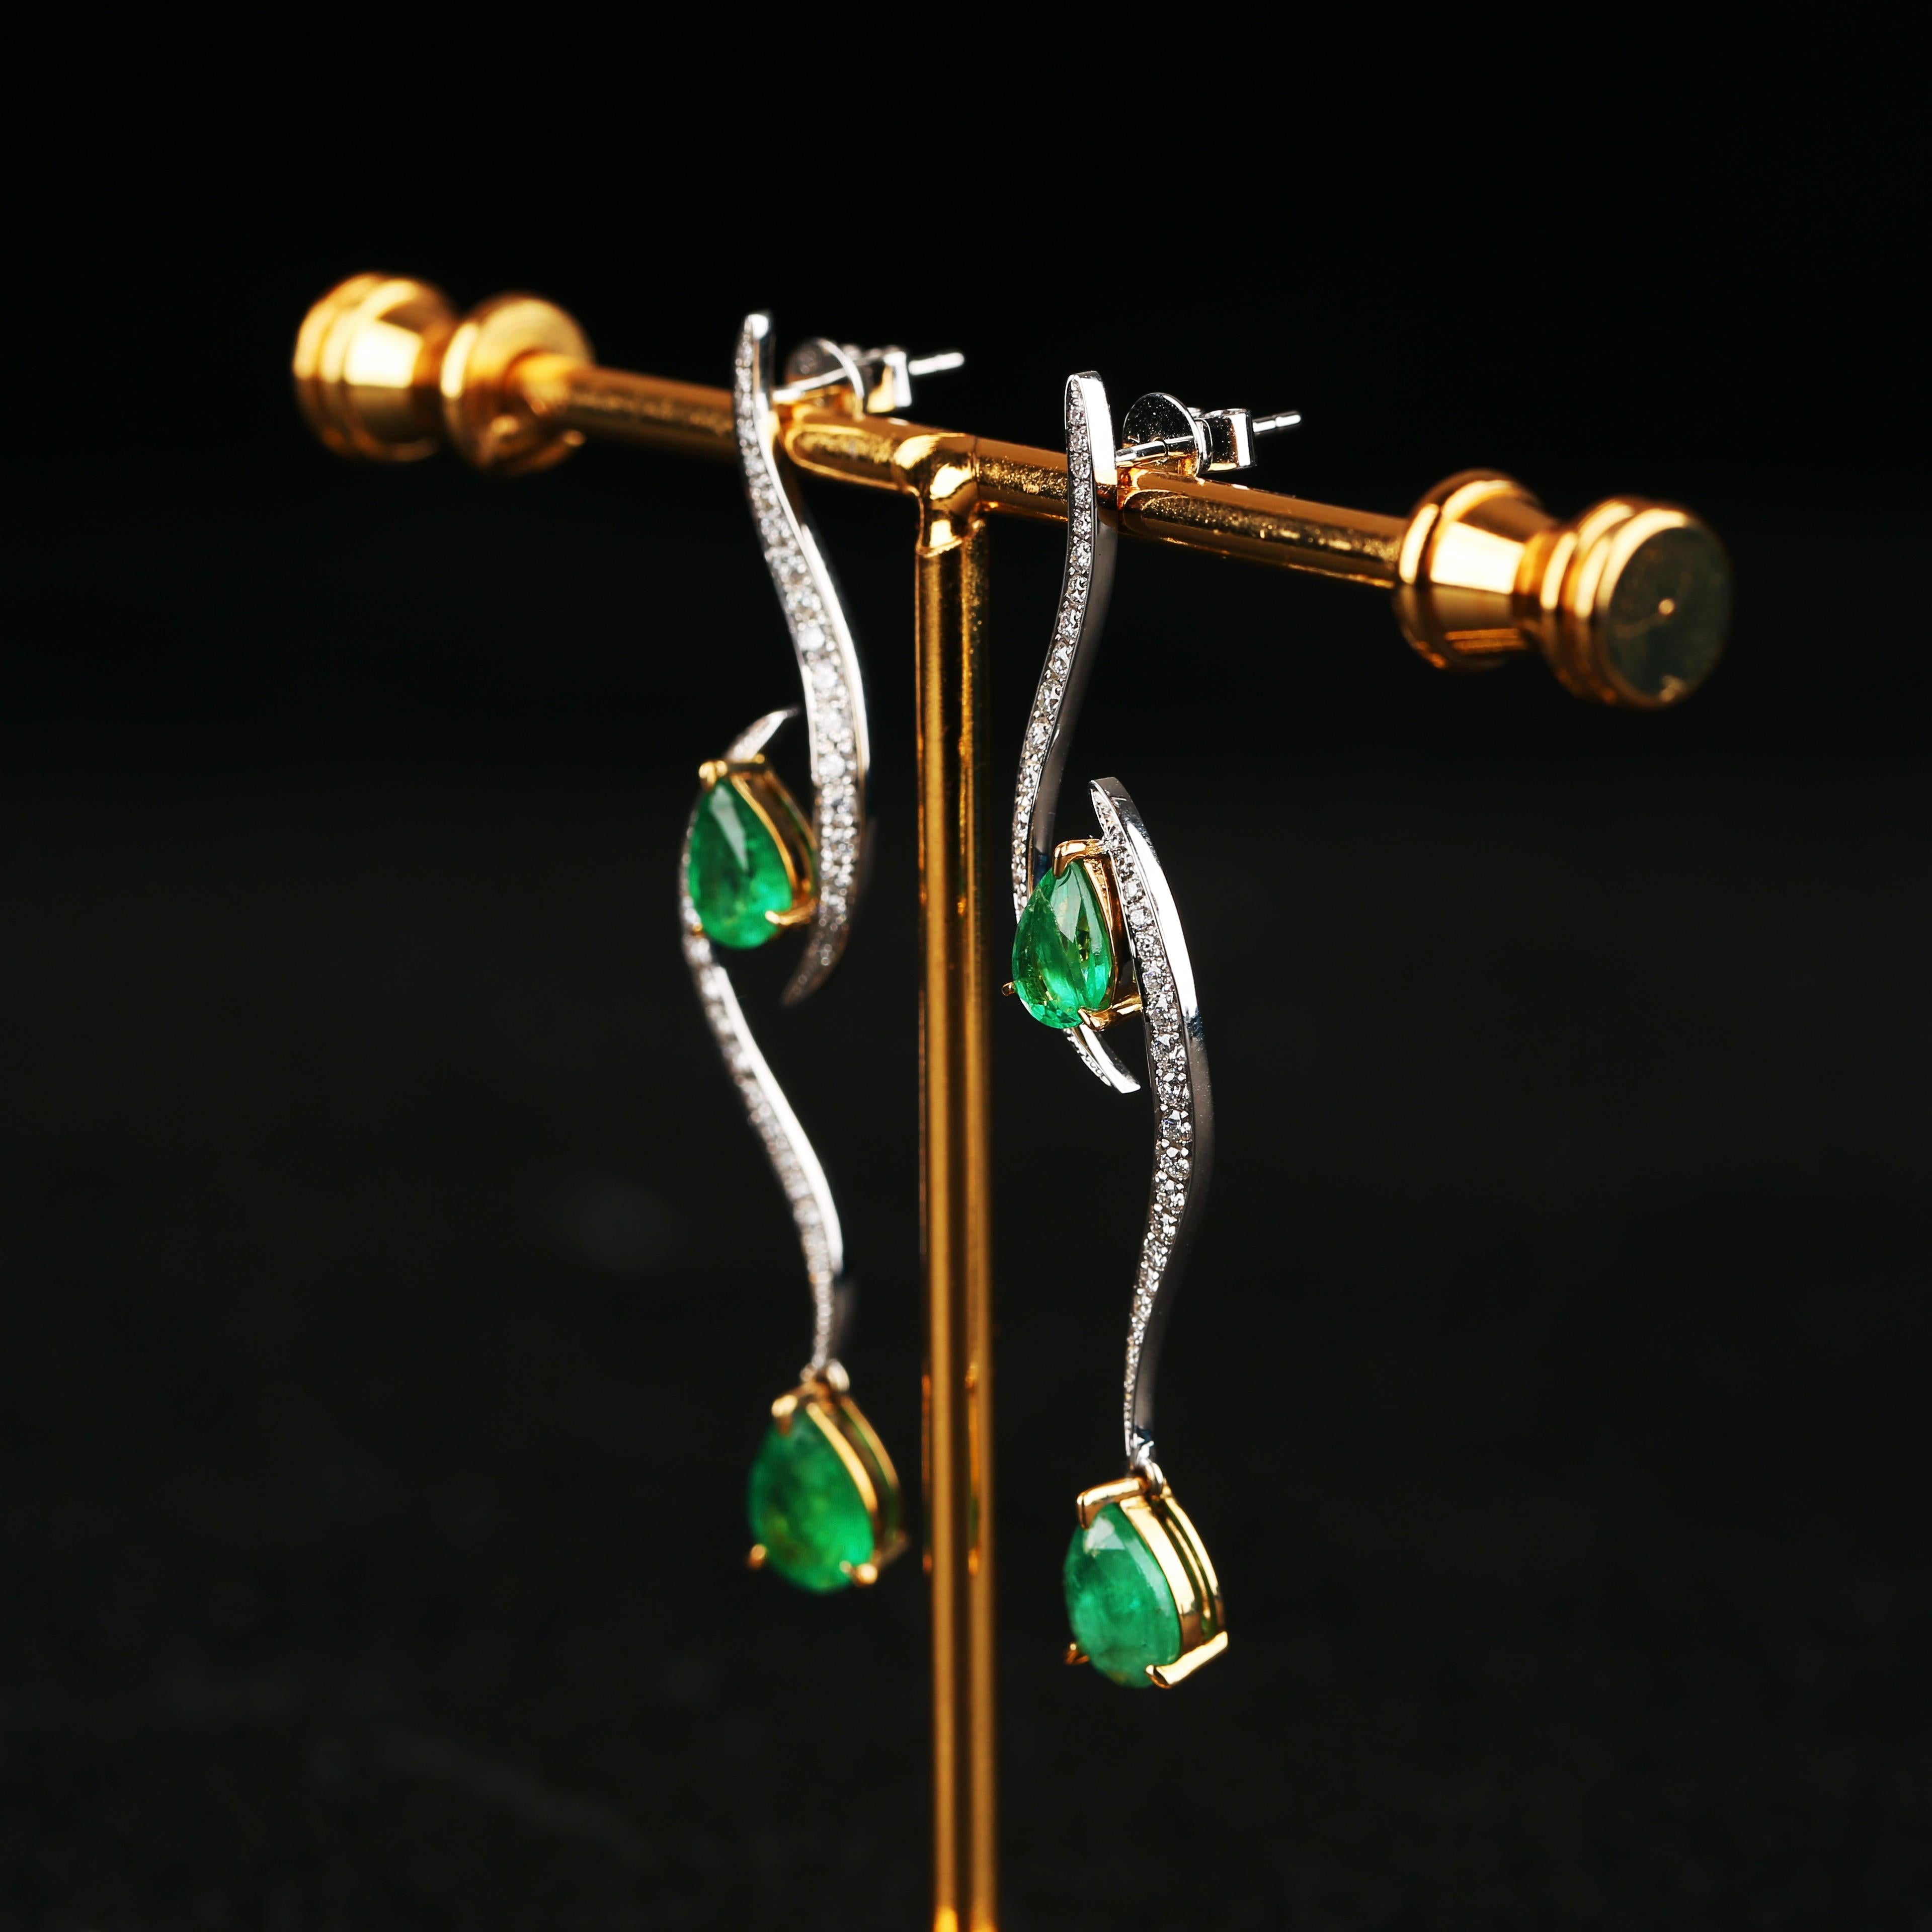 Brilliant Cut 3.1 Ct Emerald and Diamond Earring in 18k Yellow and White Gold